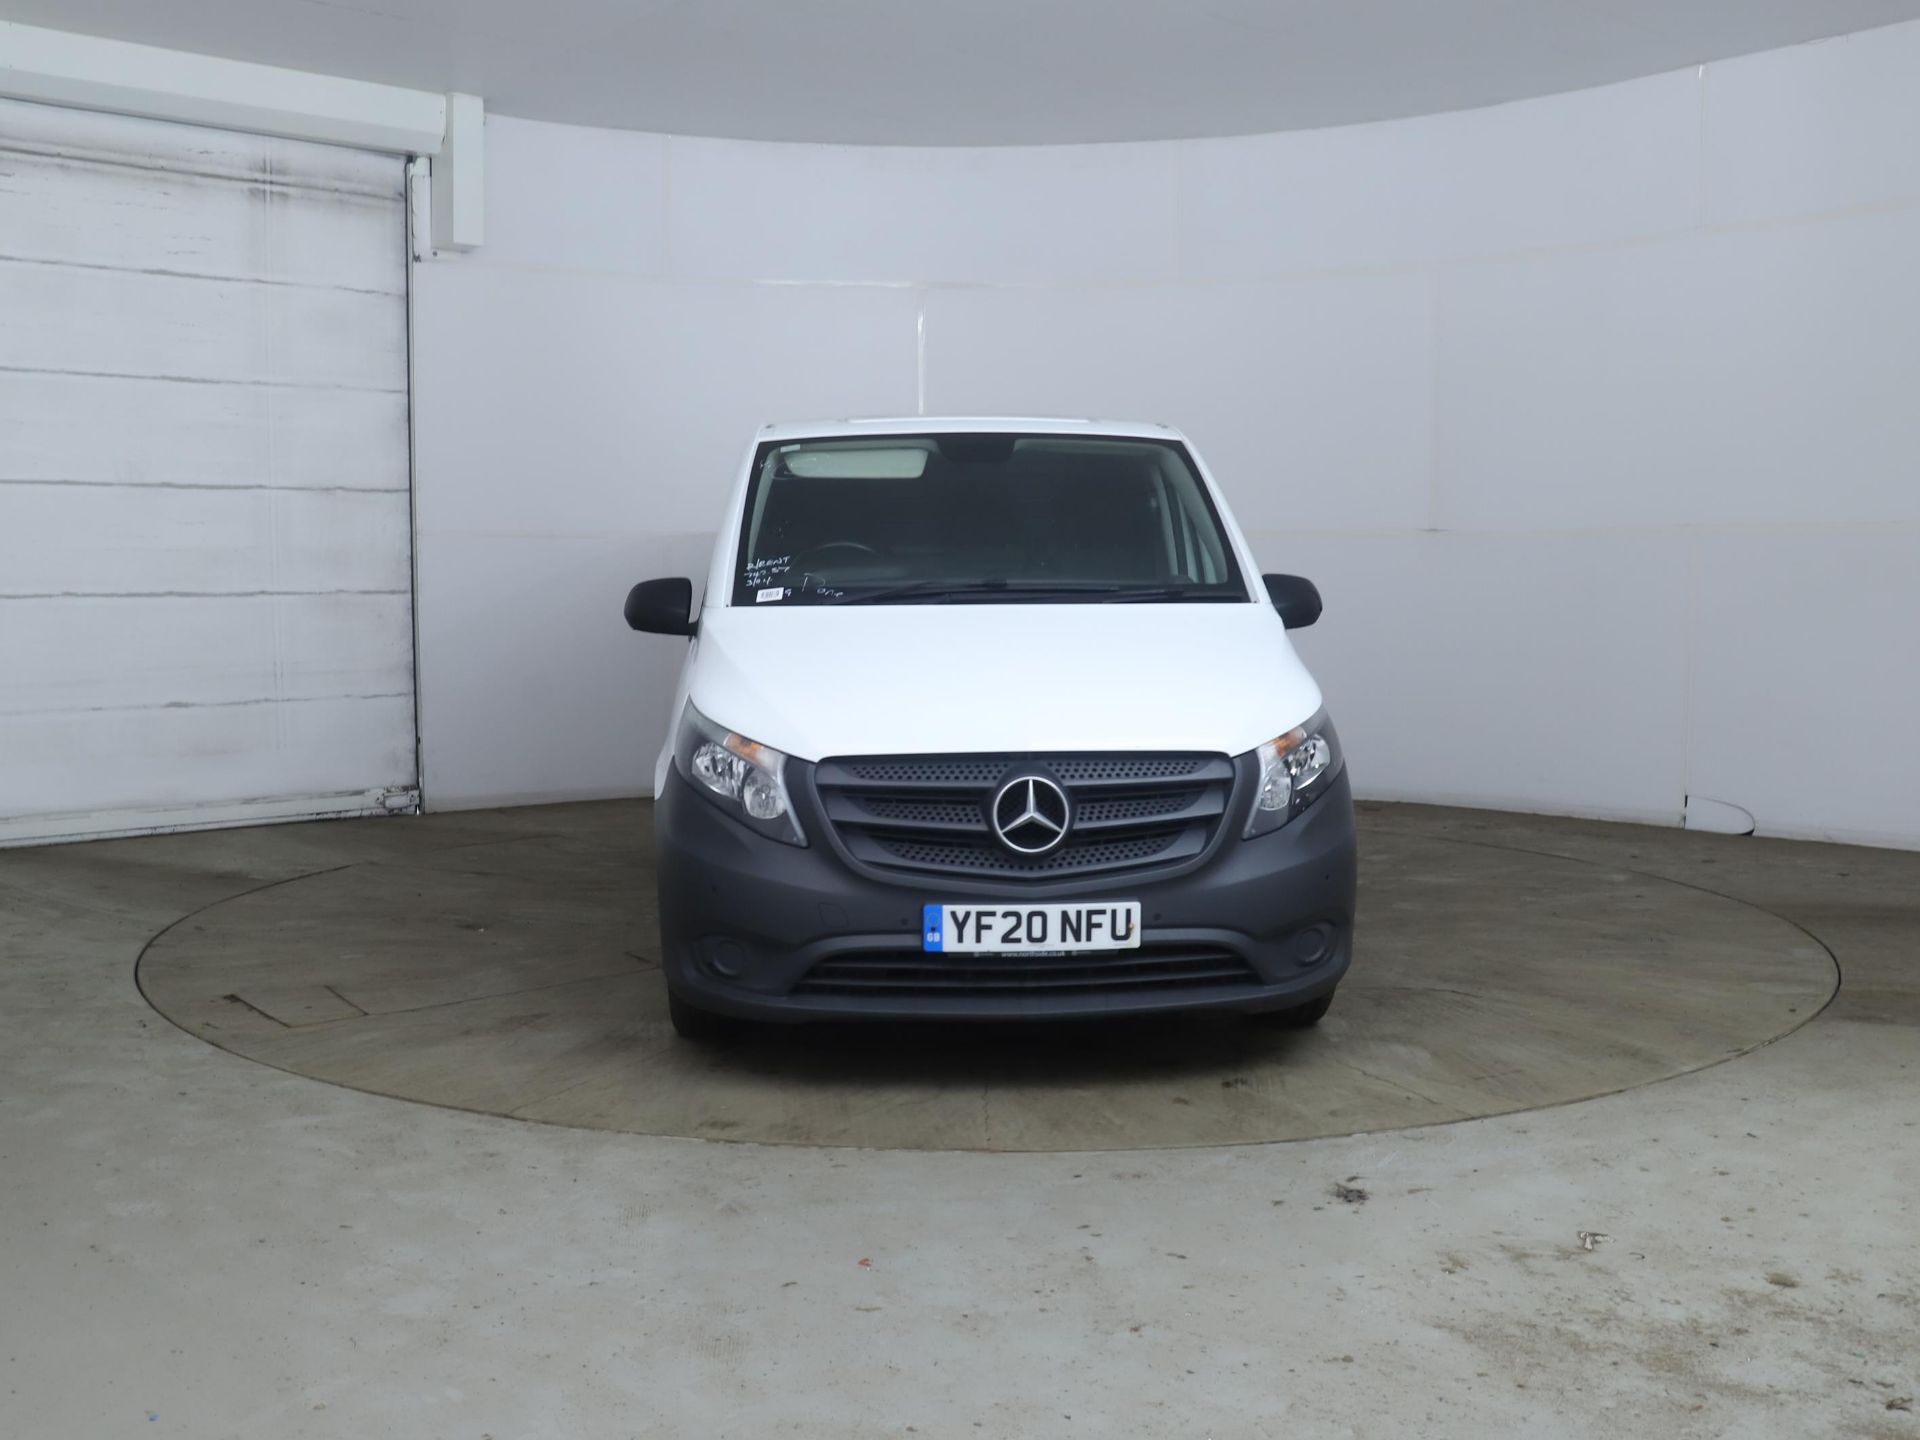 MERCEDES BENZ VITO CDI PURE - 2020 20 Reg - Only 74k Miles - 1 Owner From New - Parking Sensors - Image 4 of 12